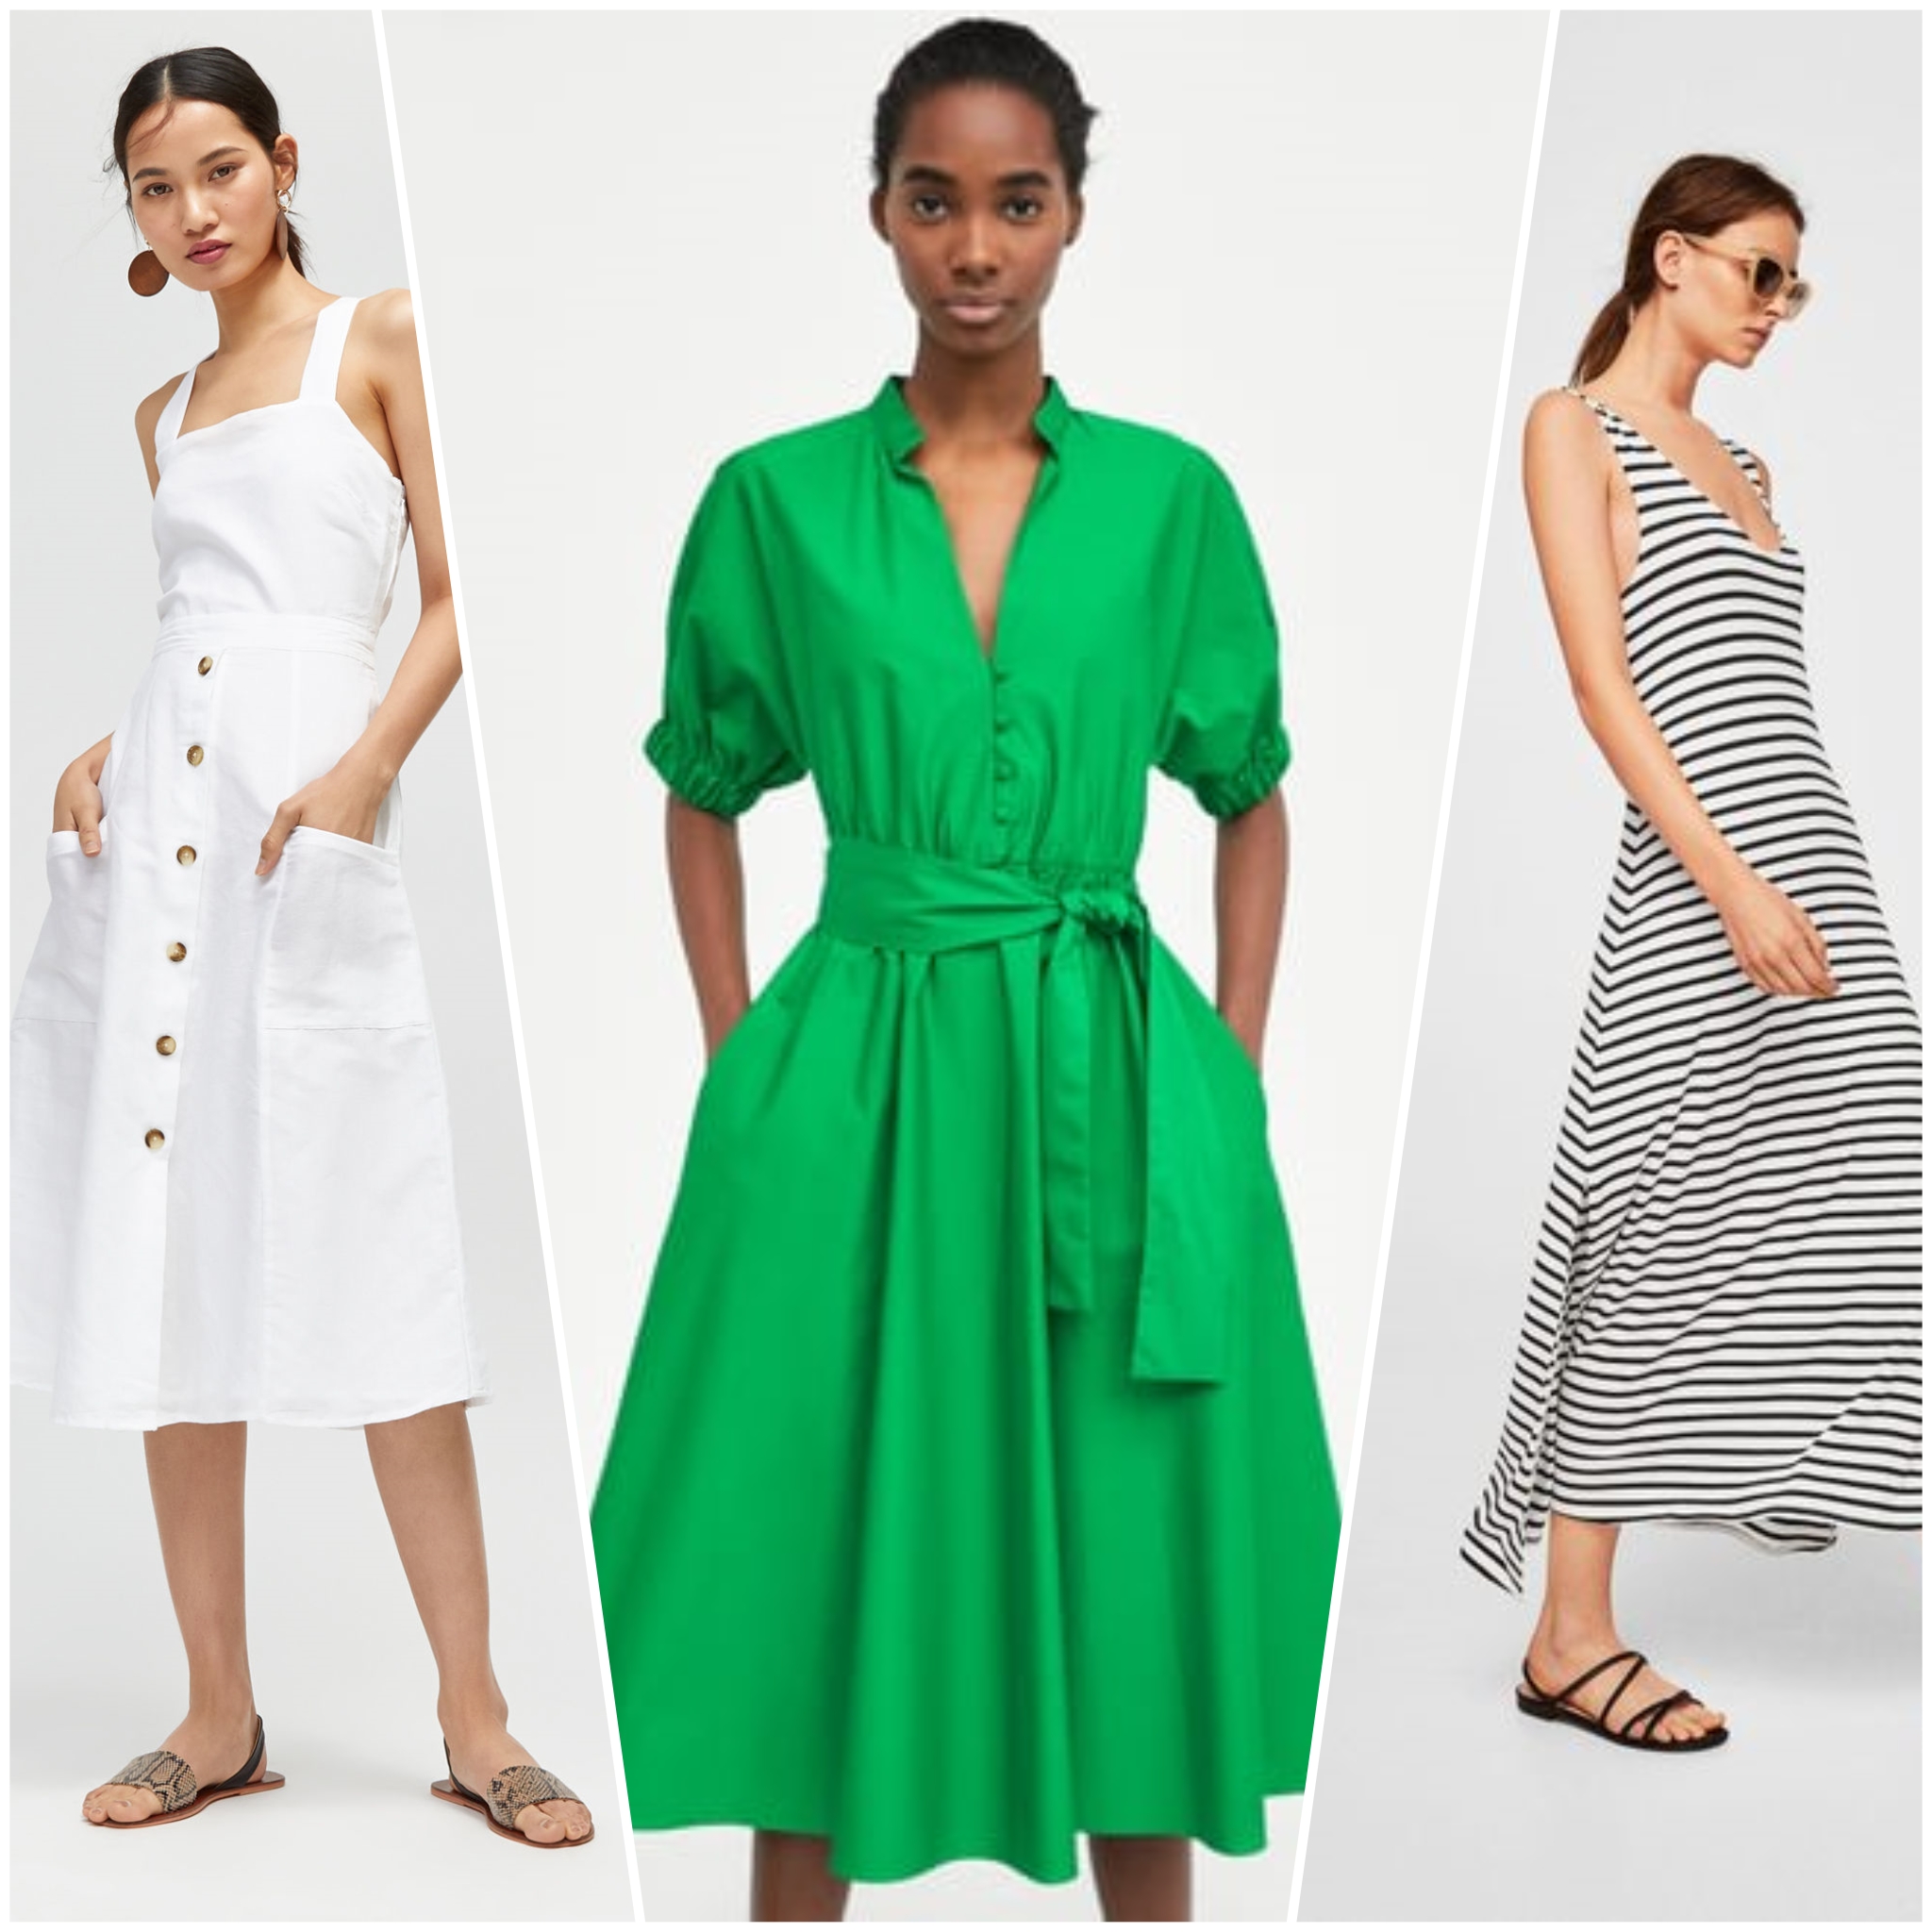 10 summer dresses to buy right now ...